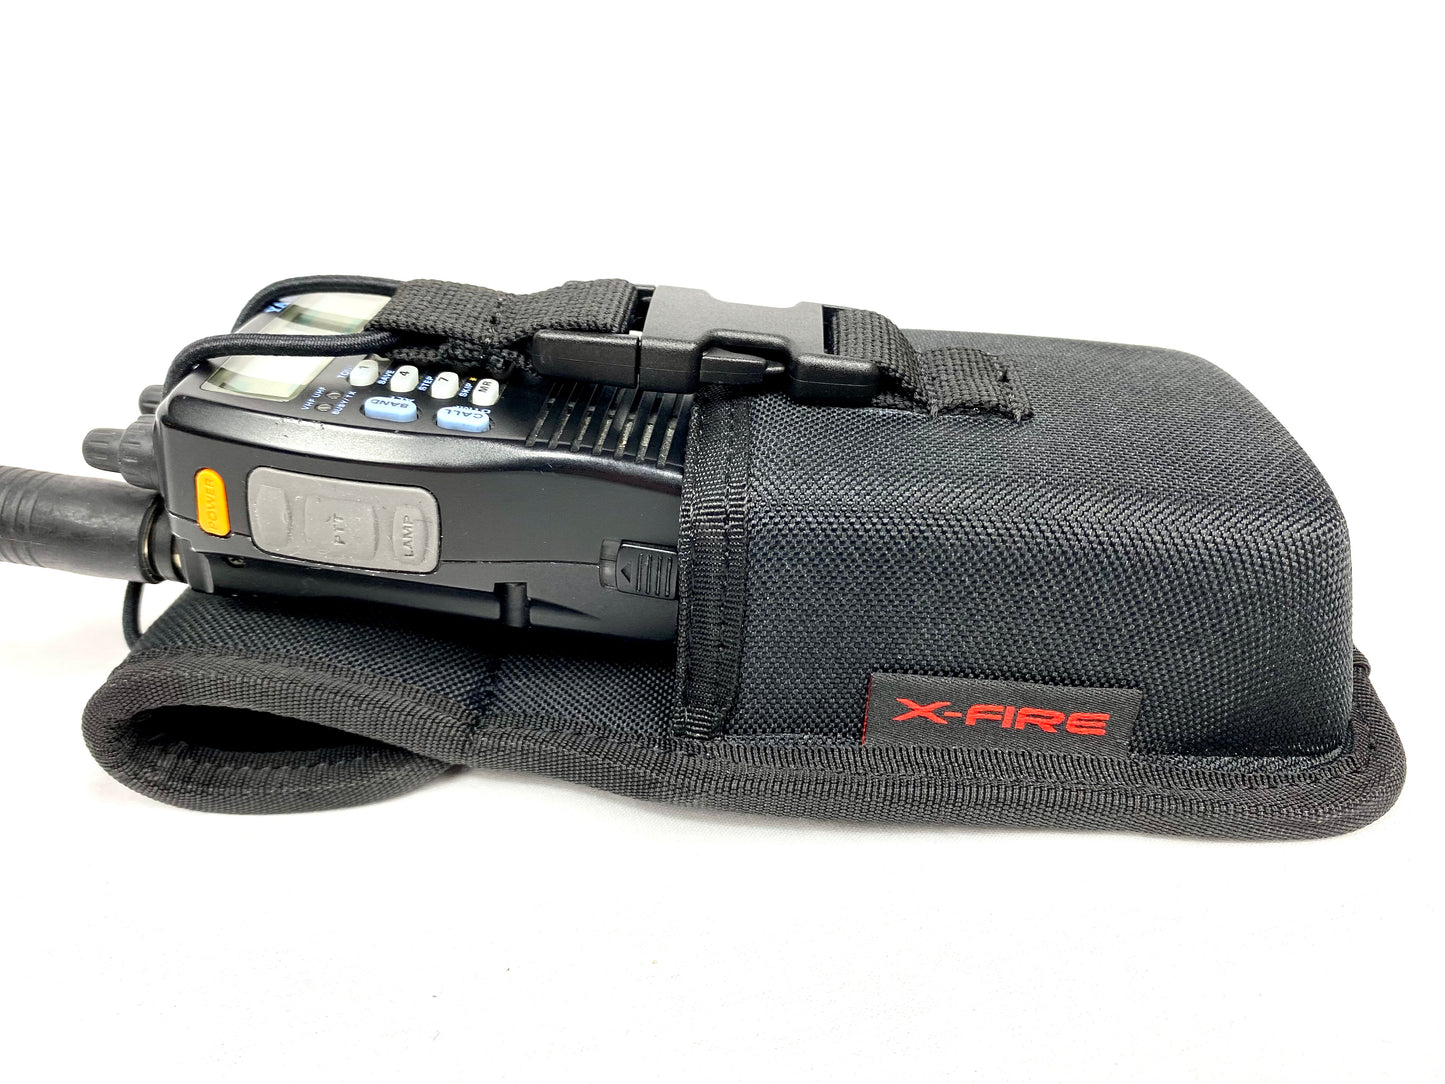 X-Fire Universal Washable Nylon Radio Case Two-Way Portable Radio Holder/Holster Pouch Case for Walkie Talkies. Fits Duty Belts to 2.25"